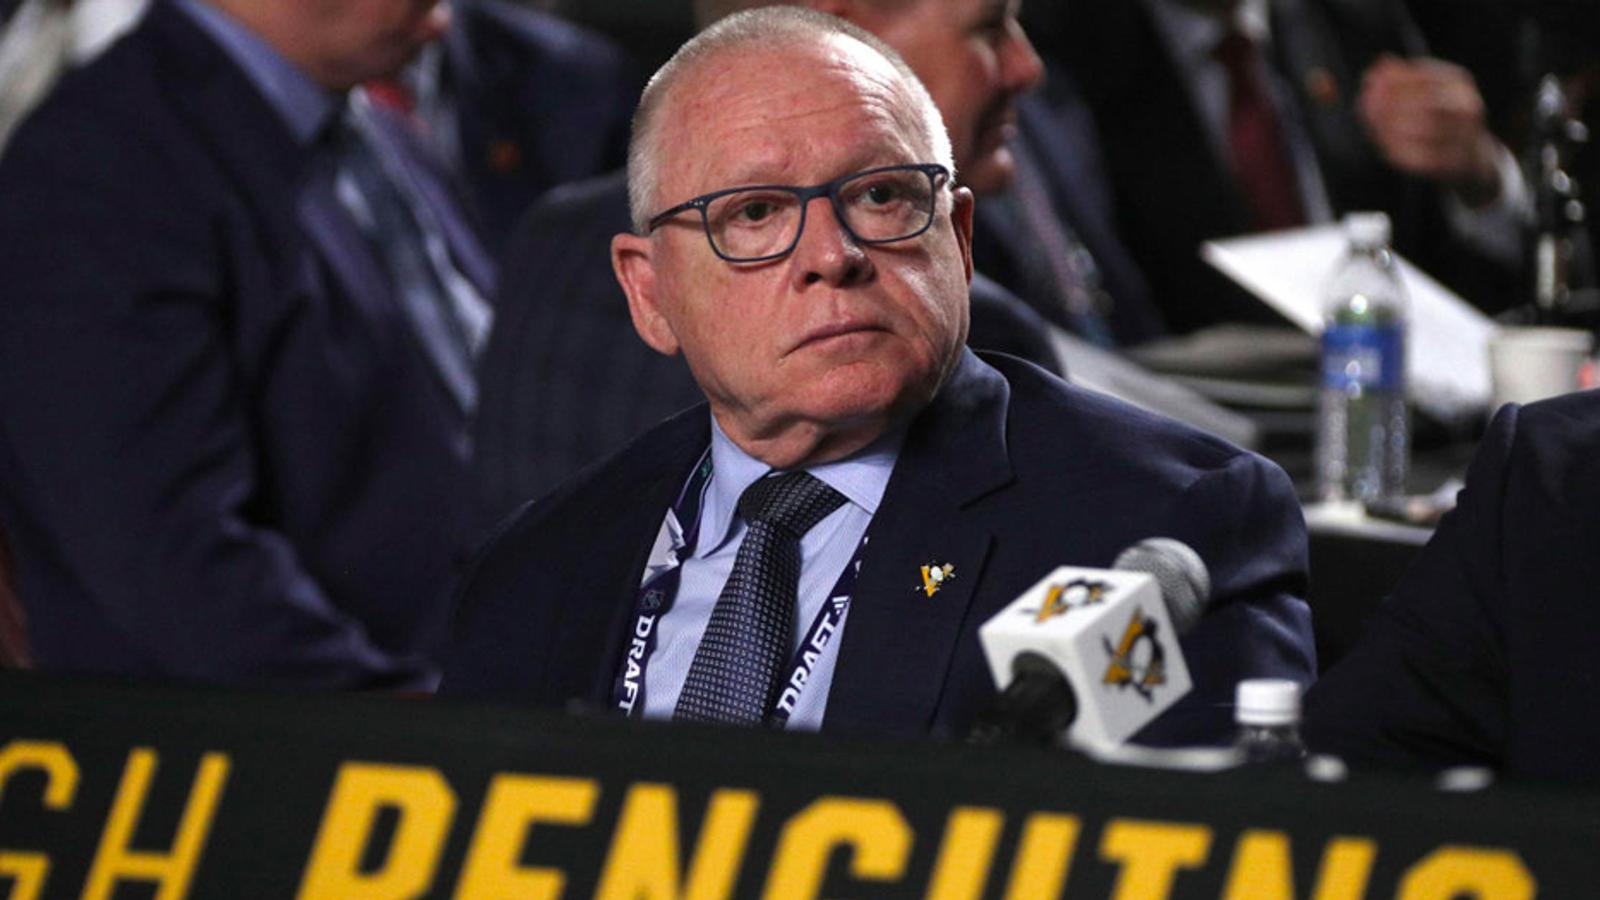 Updated details on Jim Rutherford's abrupt resignation as Penguins GM